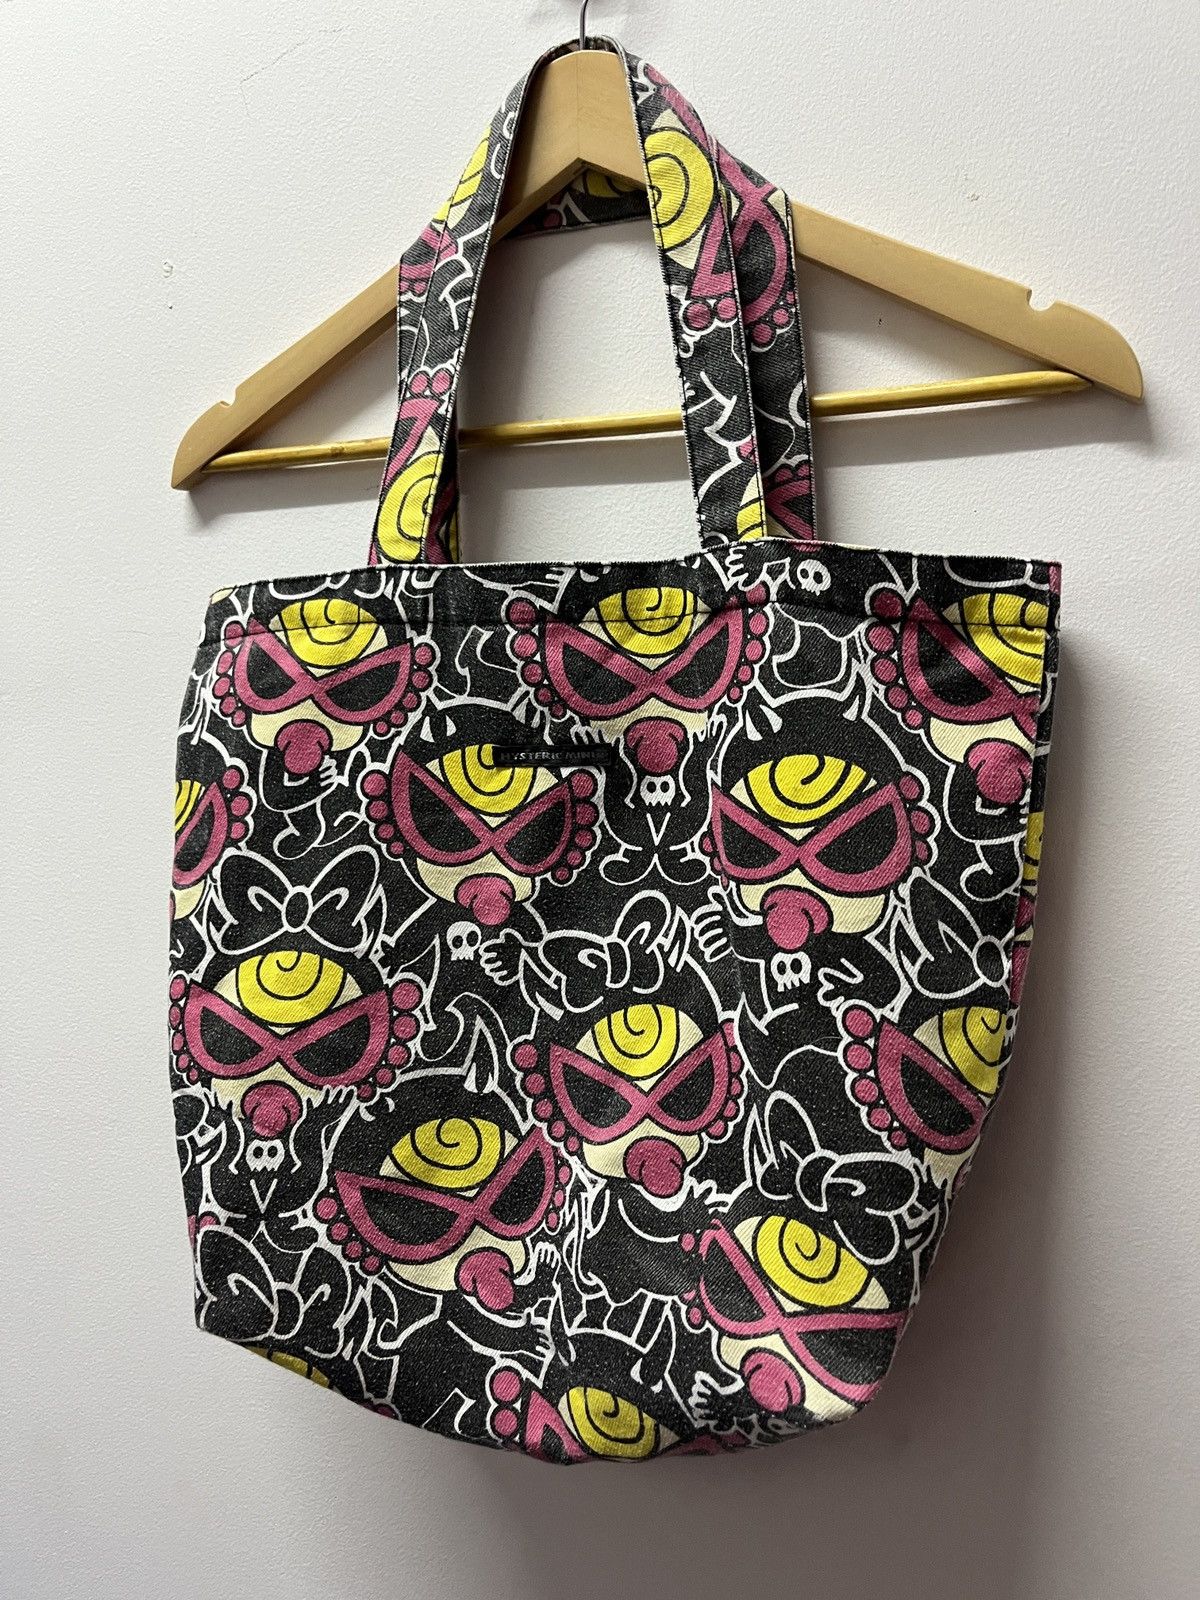 ✅FREE SHIPPING✅ Hysteric Glamour Tote Bag - 2